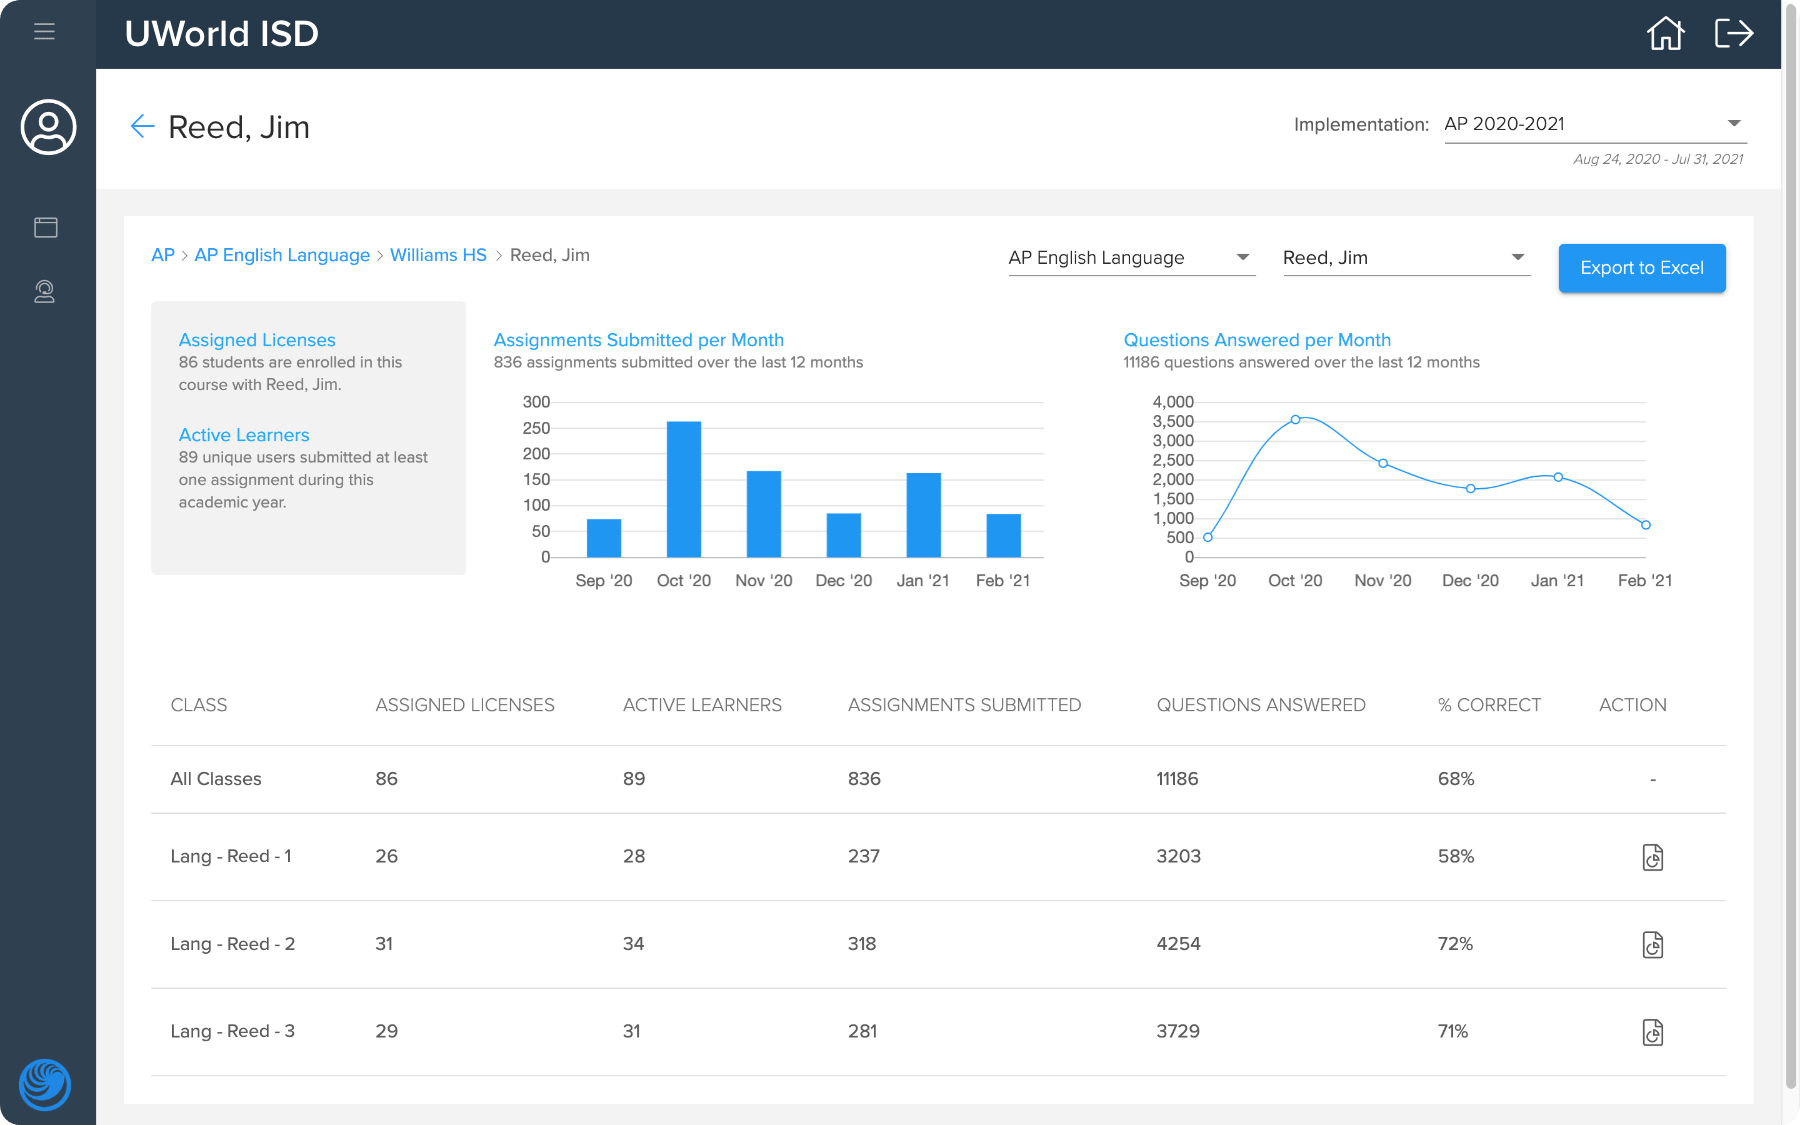 Dashboard showing AP Class Reports by Subject